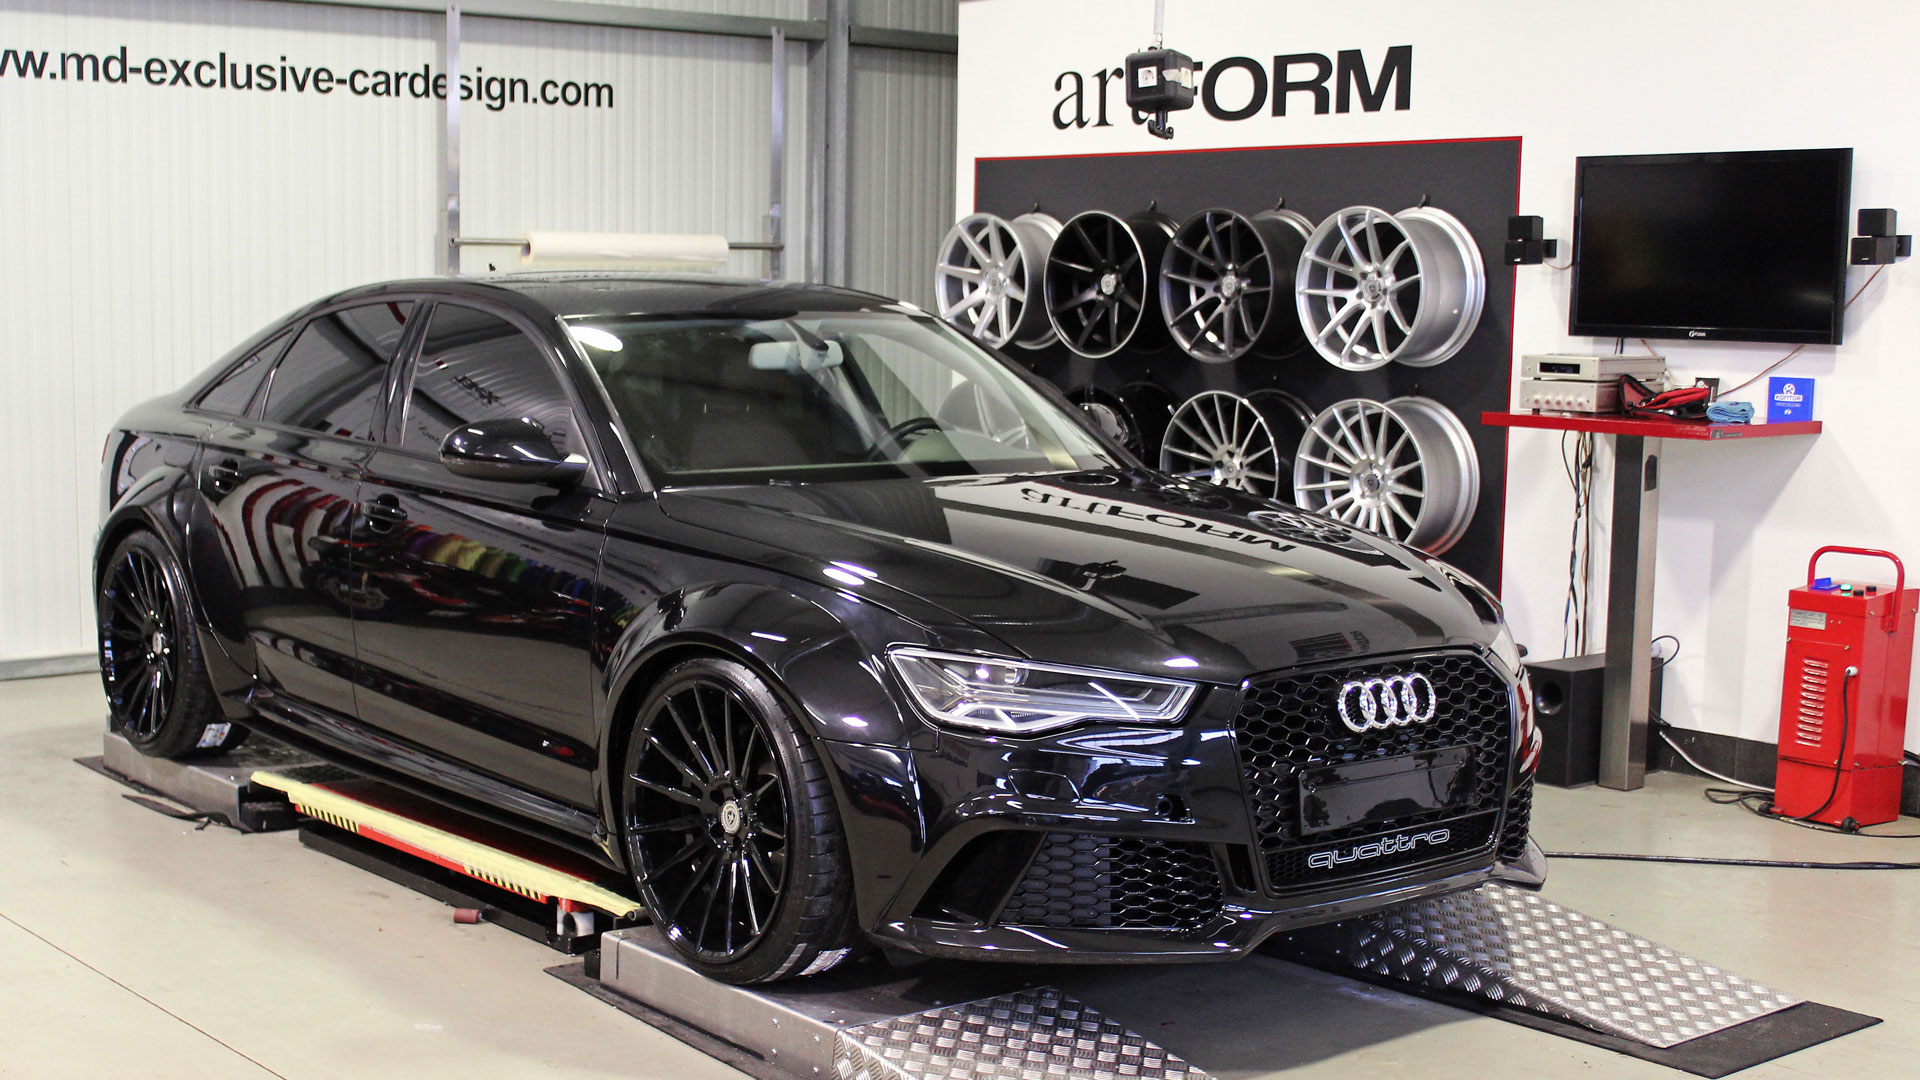 lekkage perspectief Dicht Audi A6/RS6 C7 Limousine Tuning | PD600R Widebody Aerodynamic Kit | M&D  Exclusive Cardesign